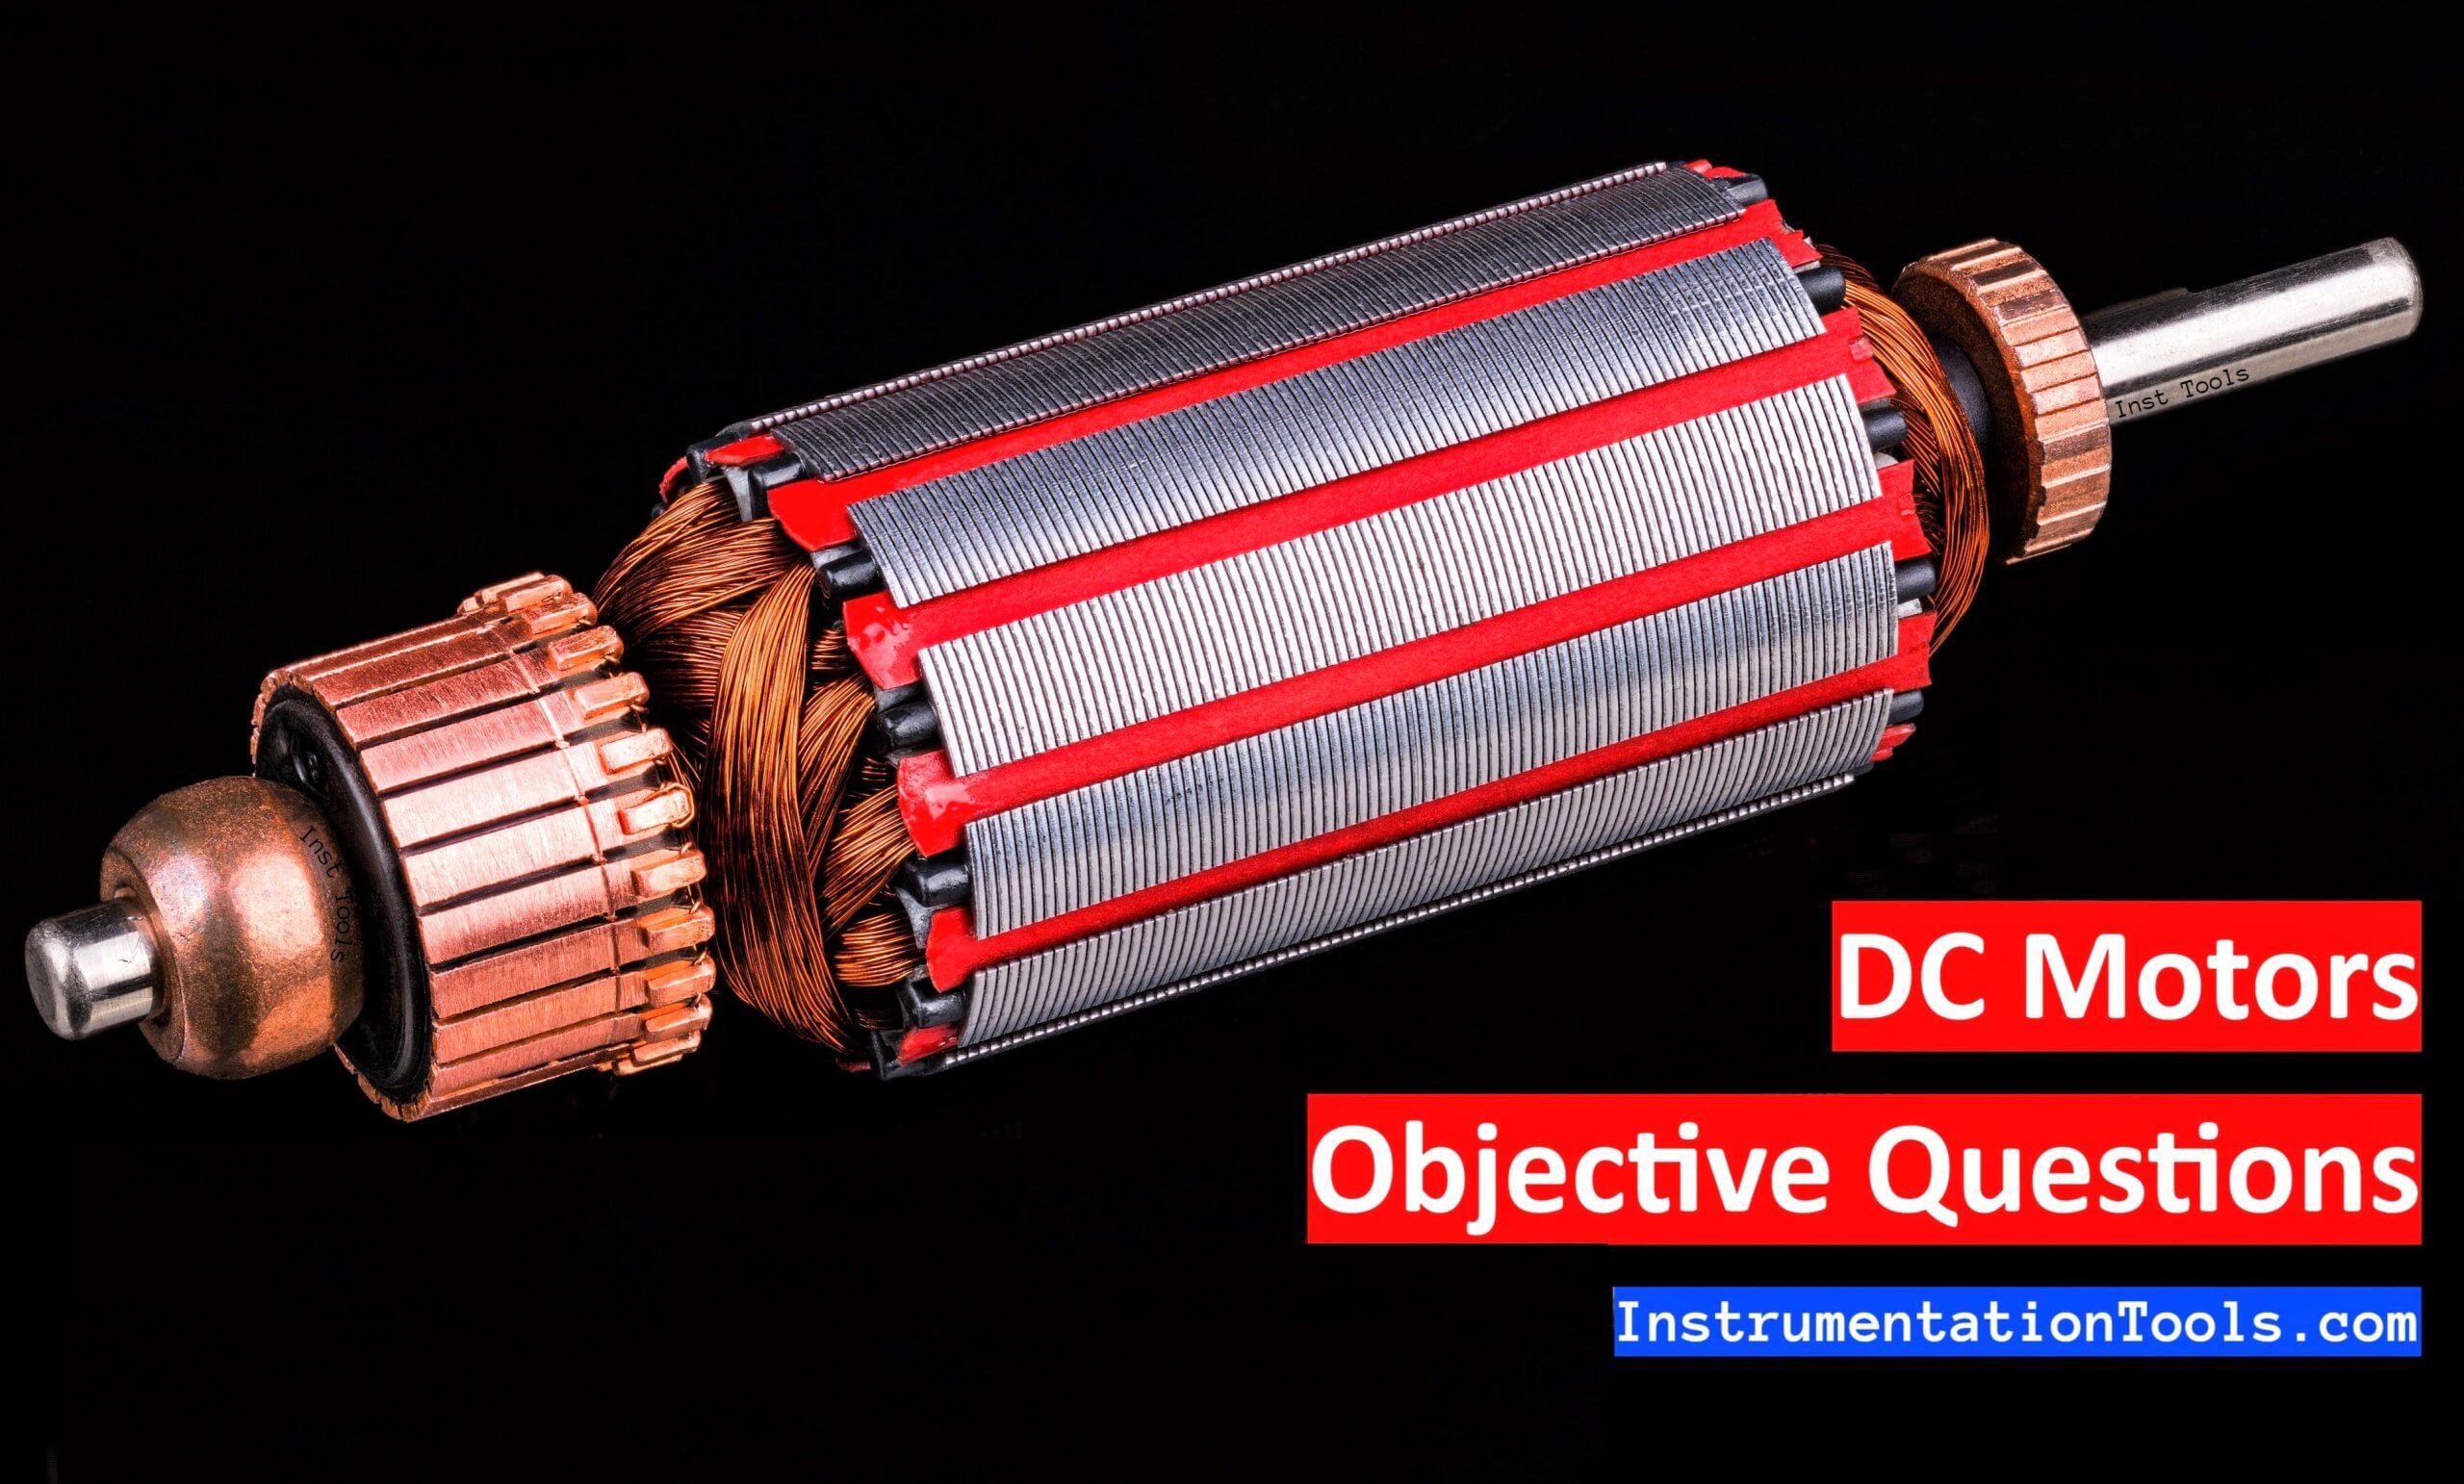 175+ DC Motors Objective Questions and Answers - Electrical Quiz